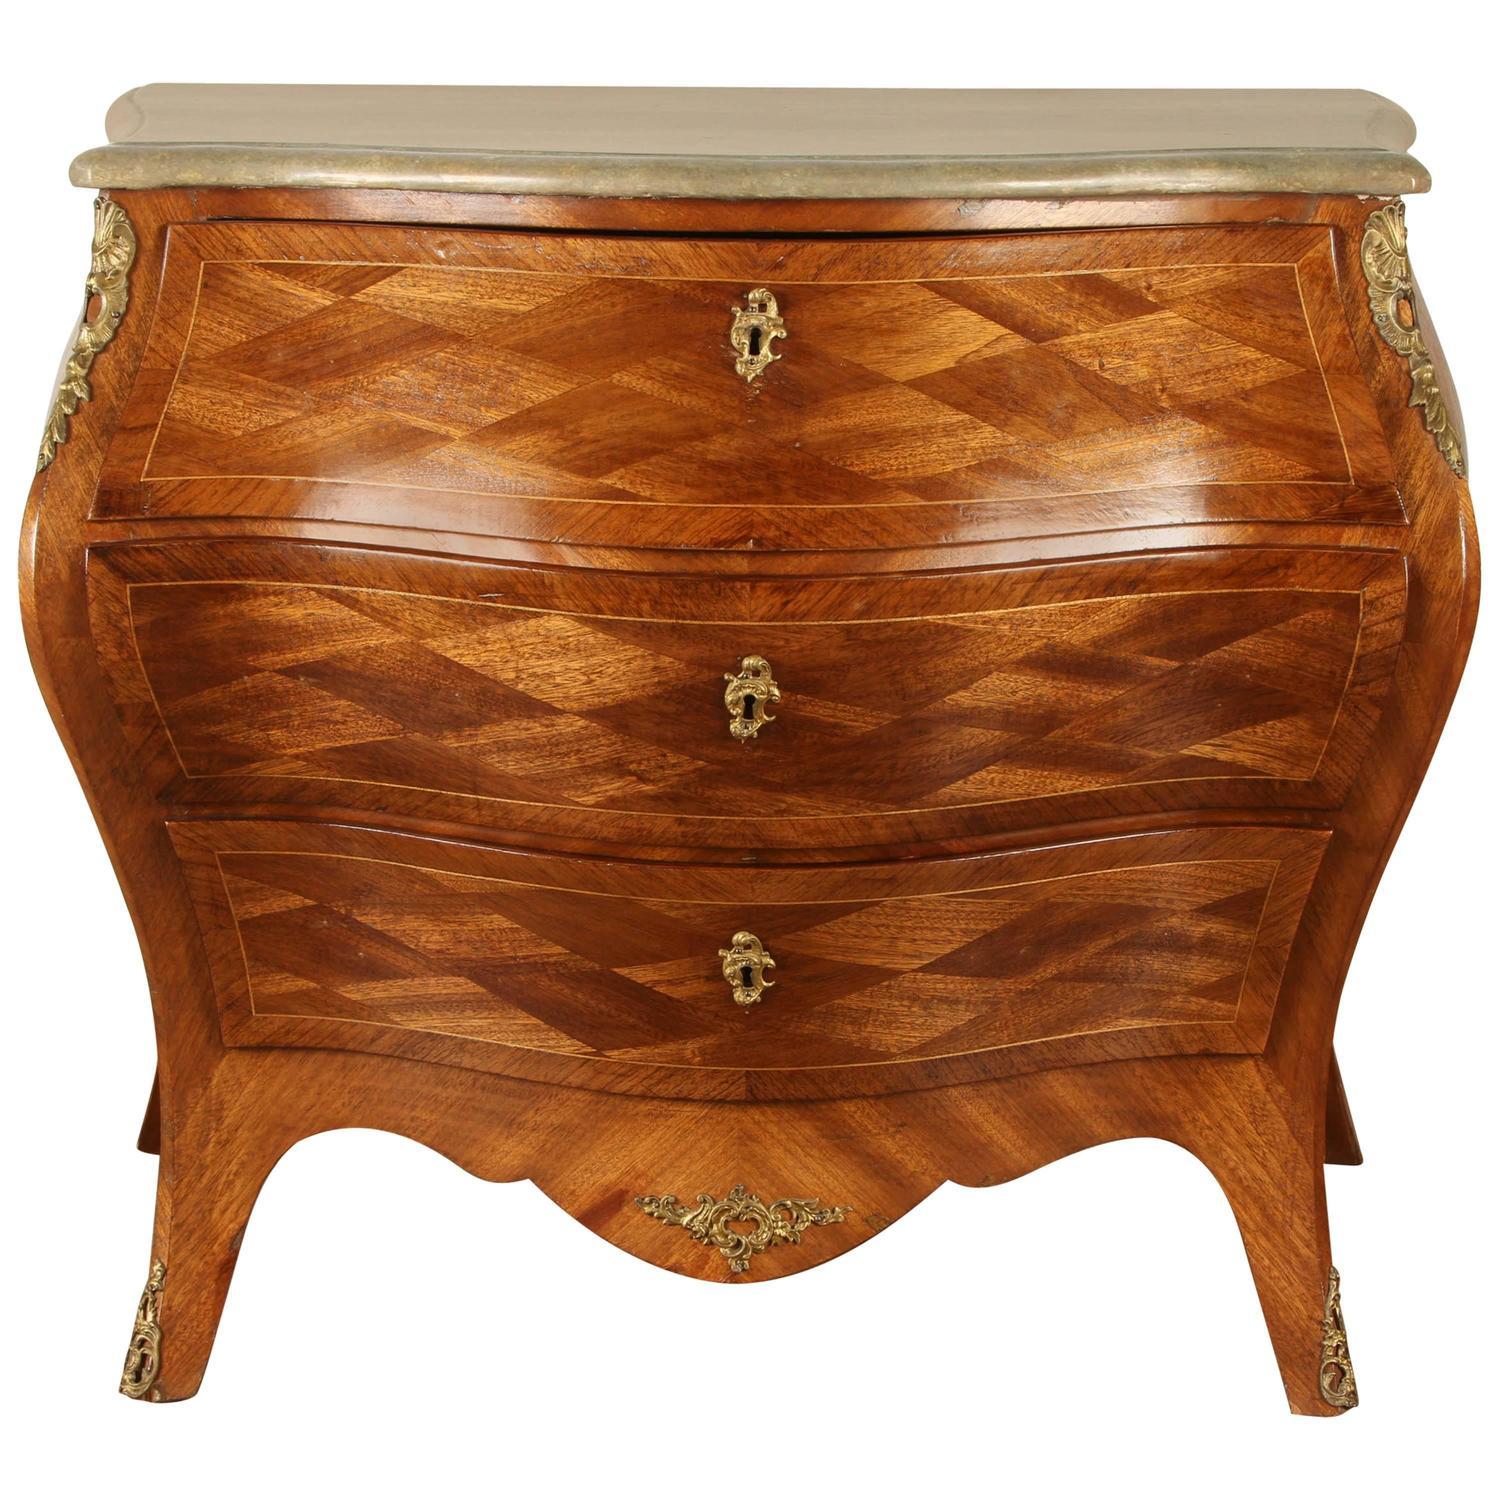 A Swedish Rococo Revival Bombay chest. This Rococo Revival chest is covered overall in parquetry, with gilt ormolu. It has three drawers. The top of the chest is in faux painted marble.